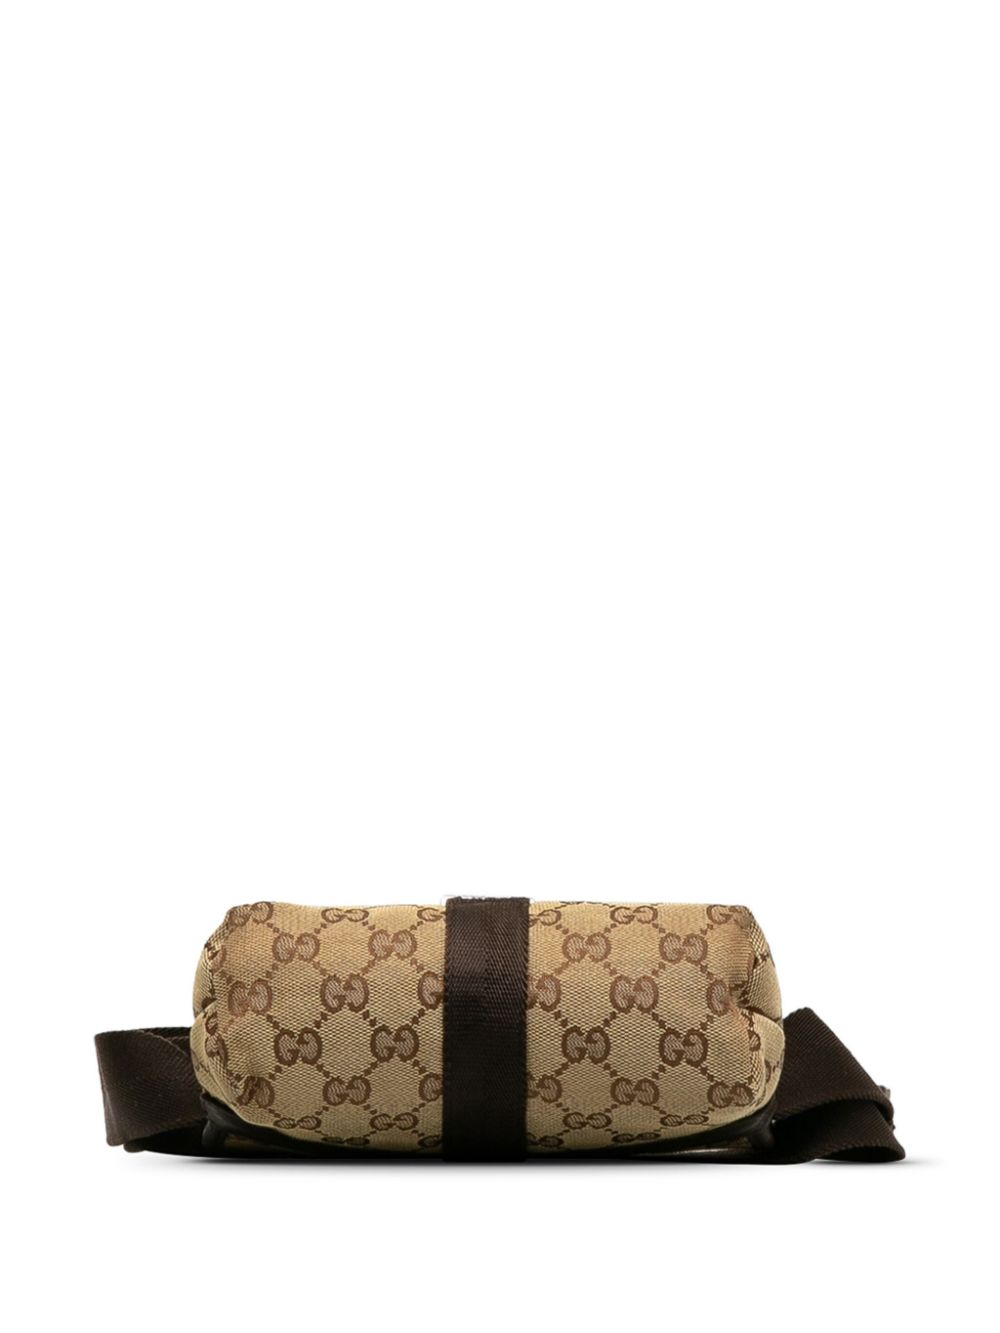 Pre-owned Gucci 2000-2015  Gg Canvas Belt Bag In Neutrals